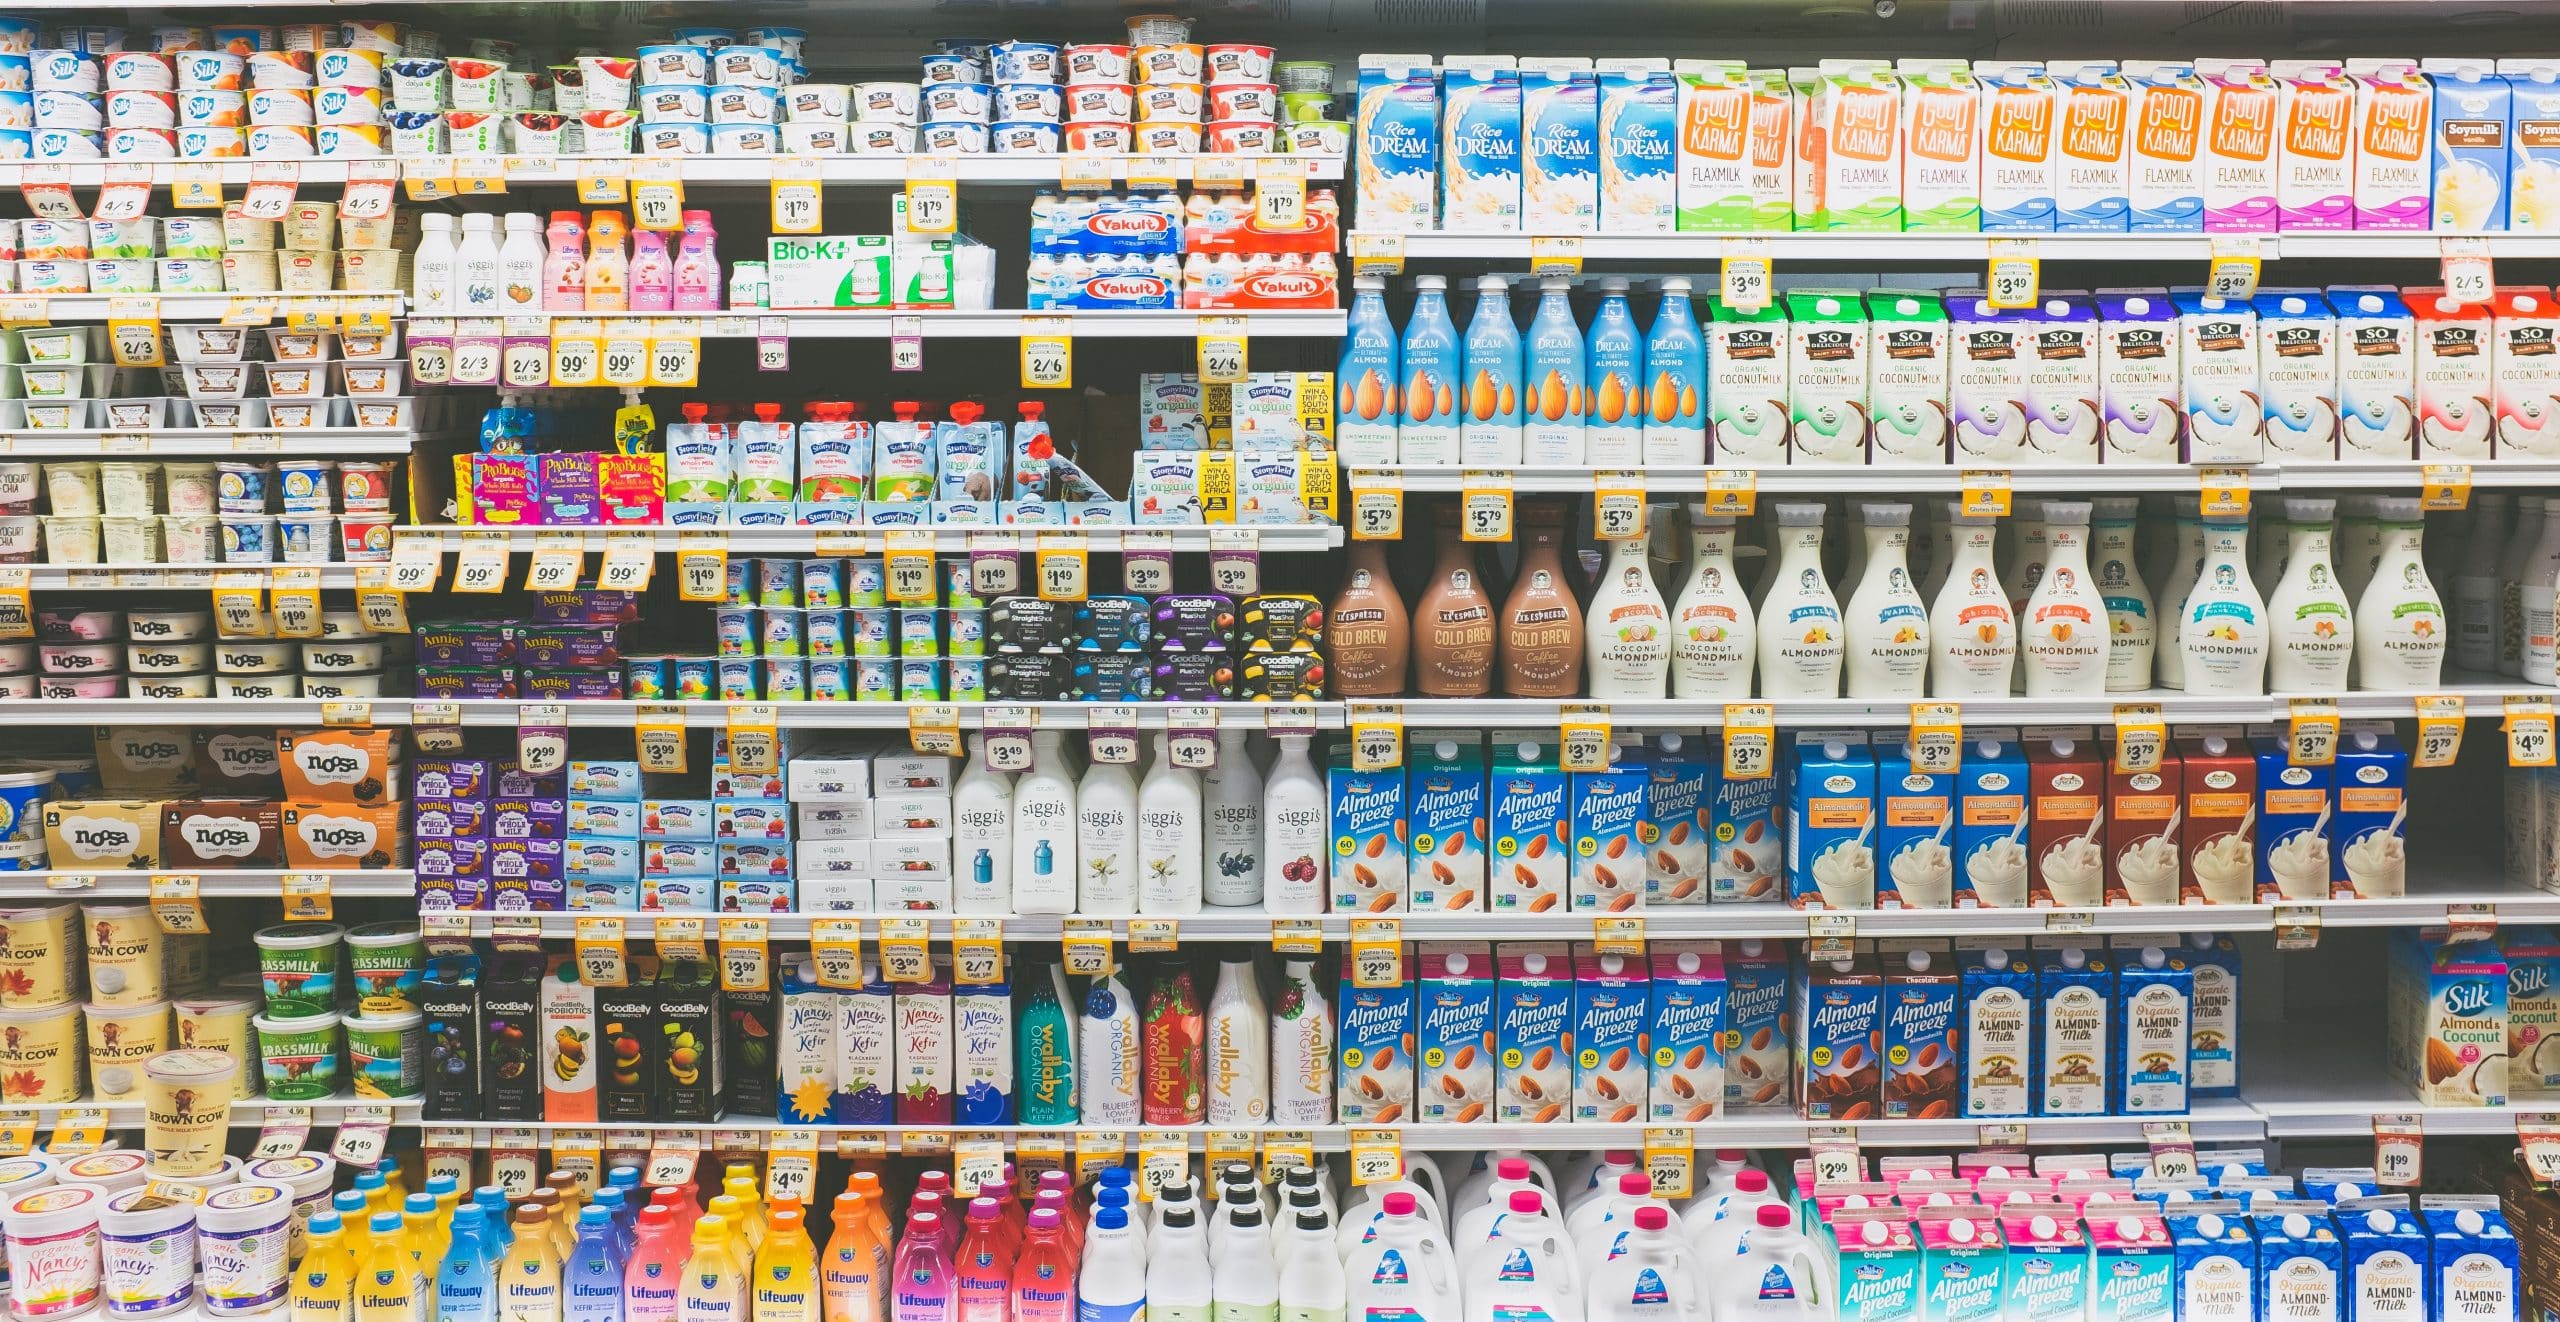 Has plant milk become the growth engine of the overall milk category?